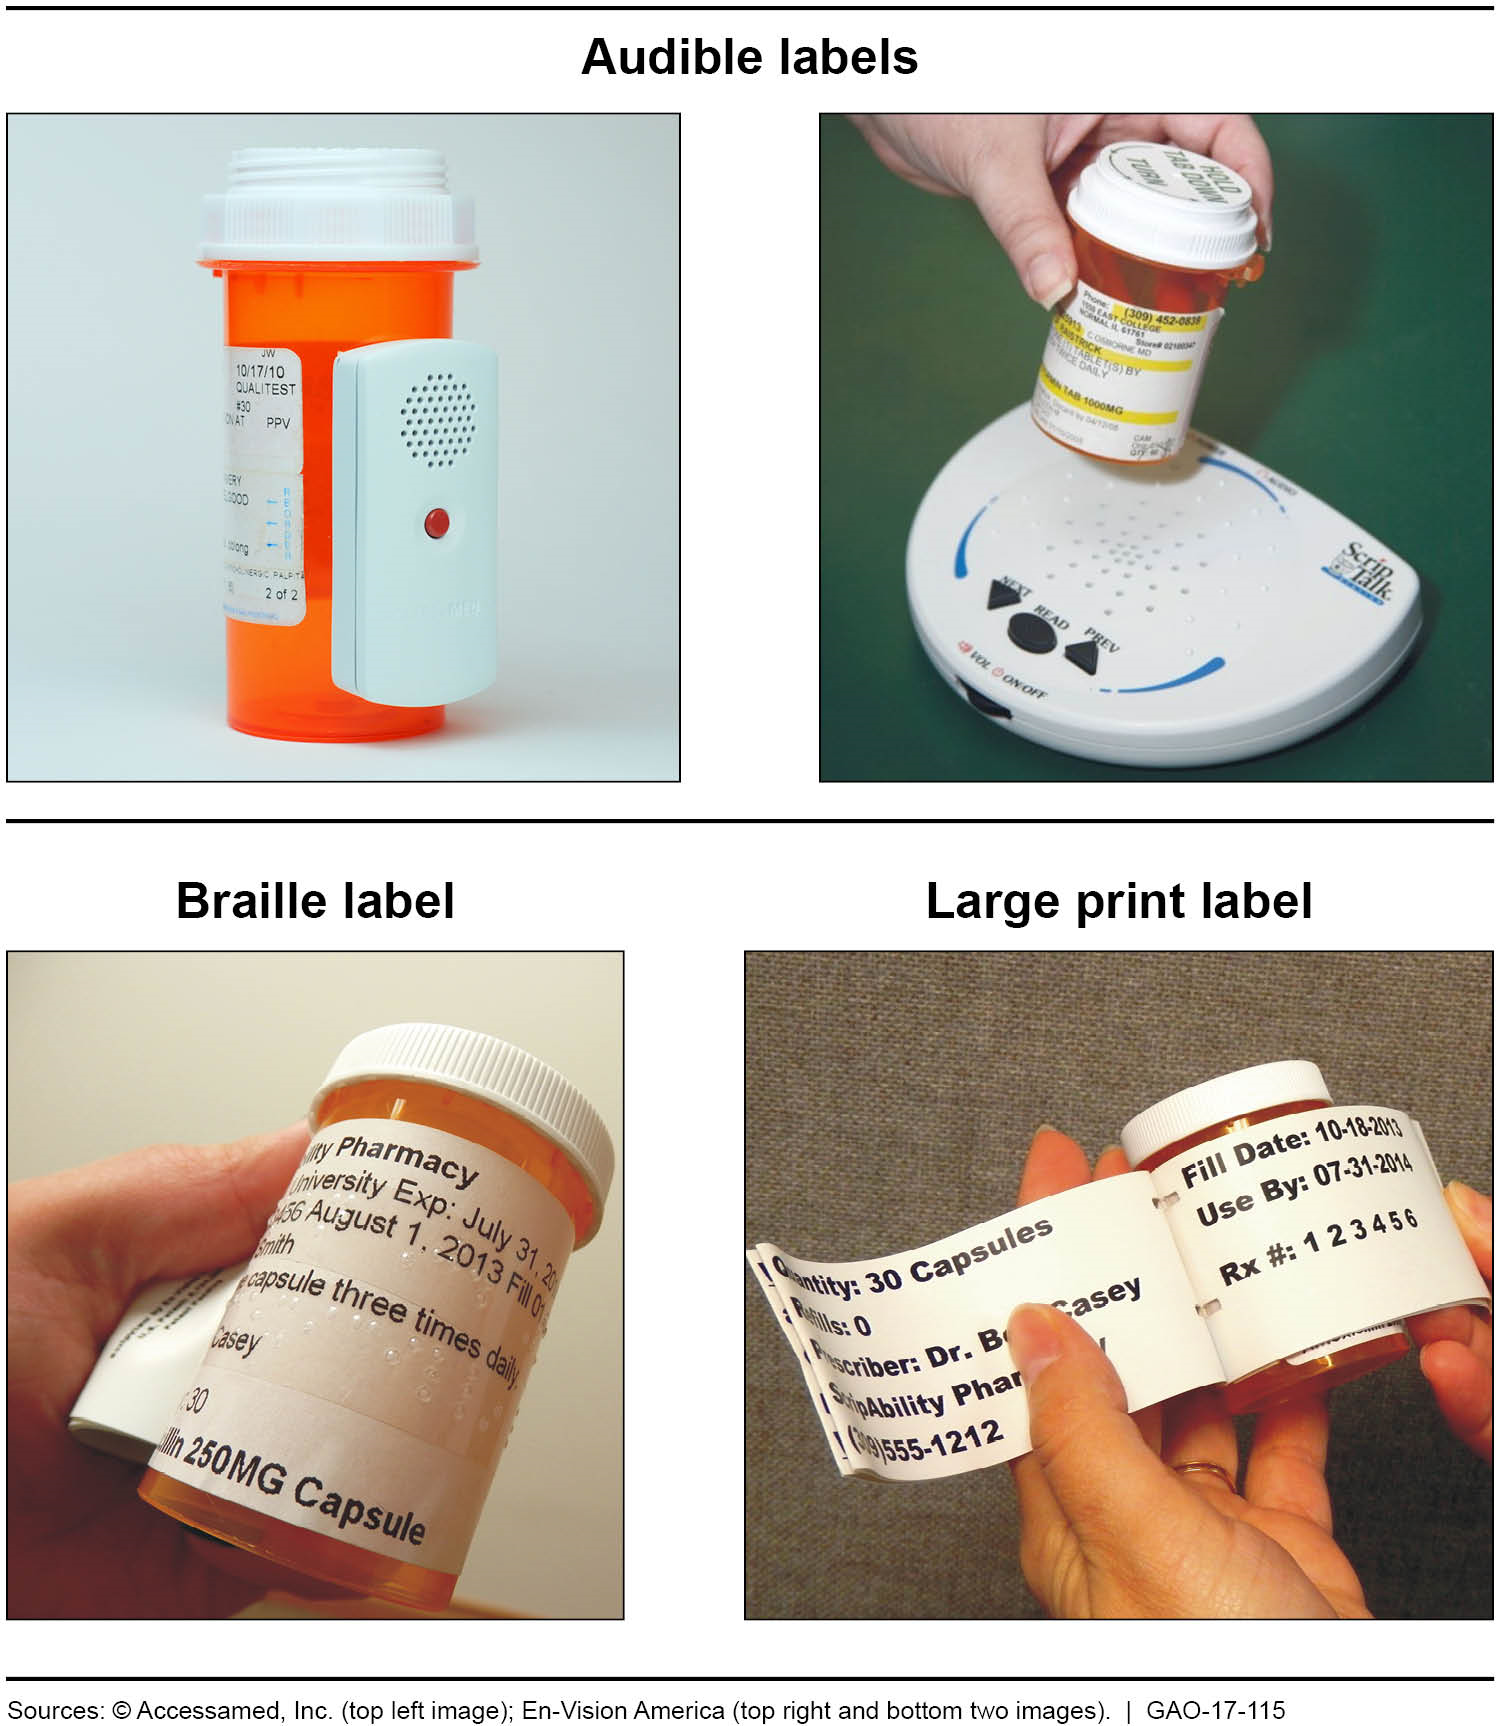 Examples of audible, braille, and large print prescription drug container labels. 